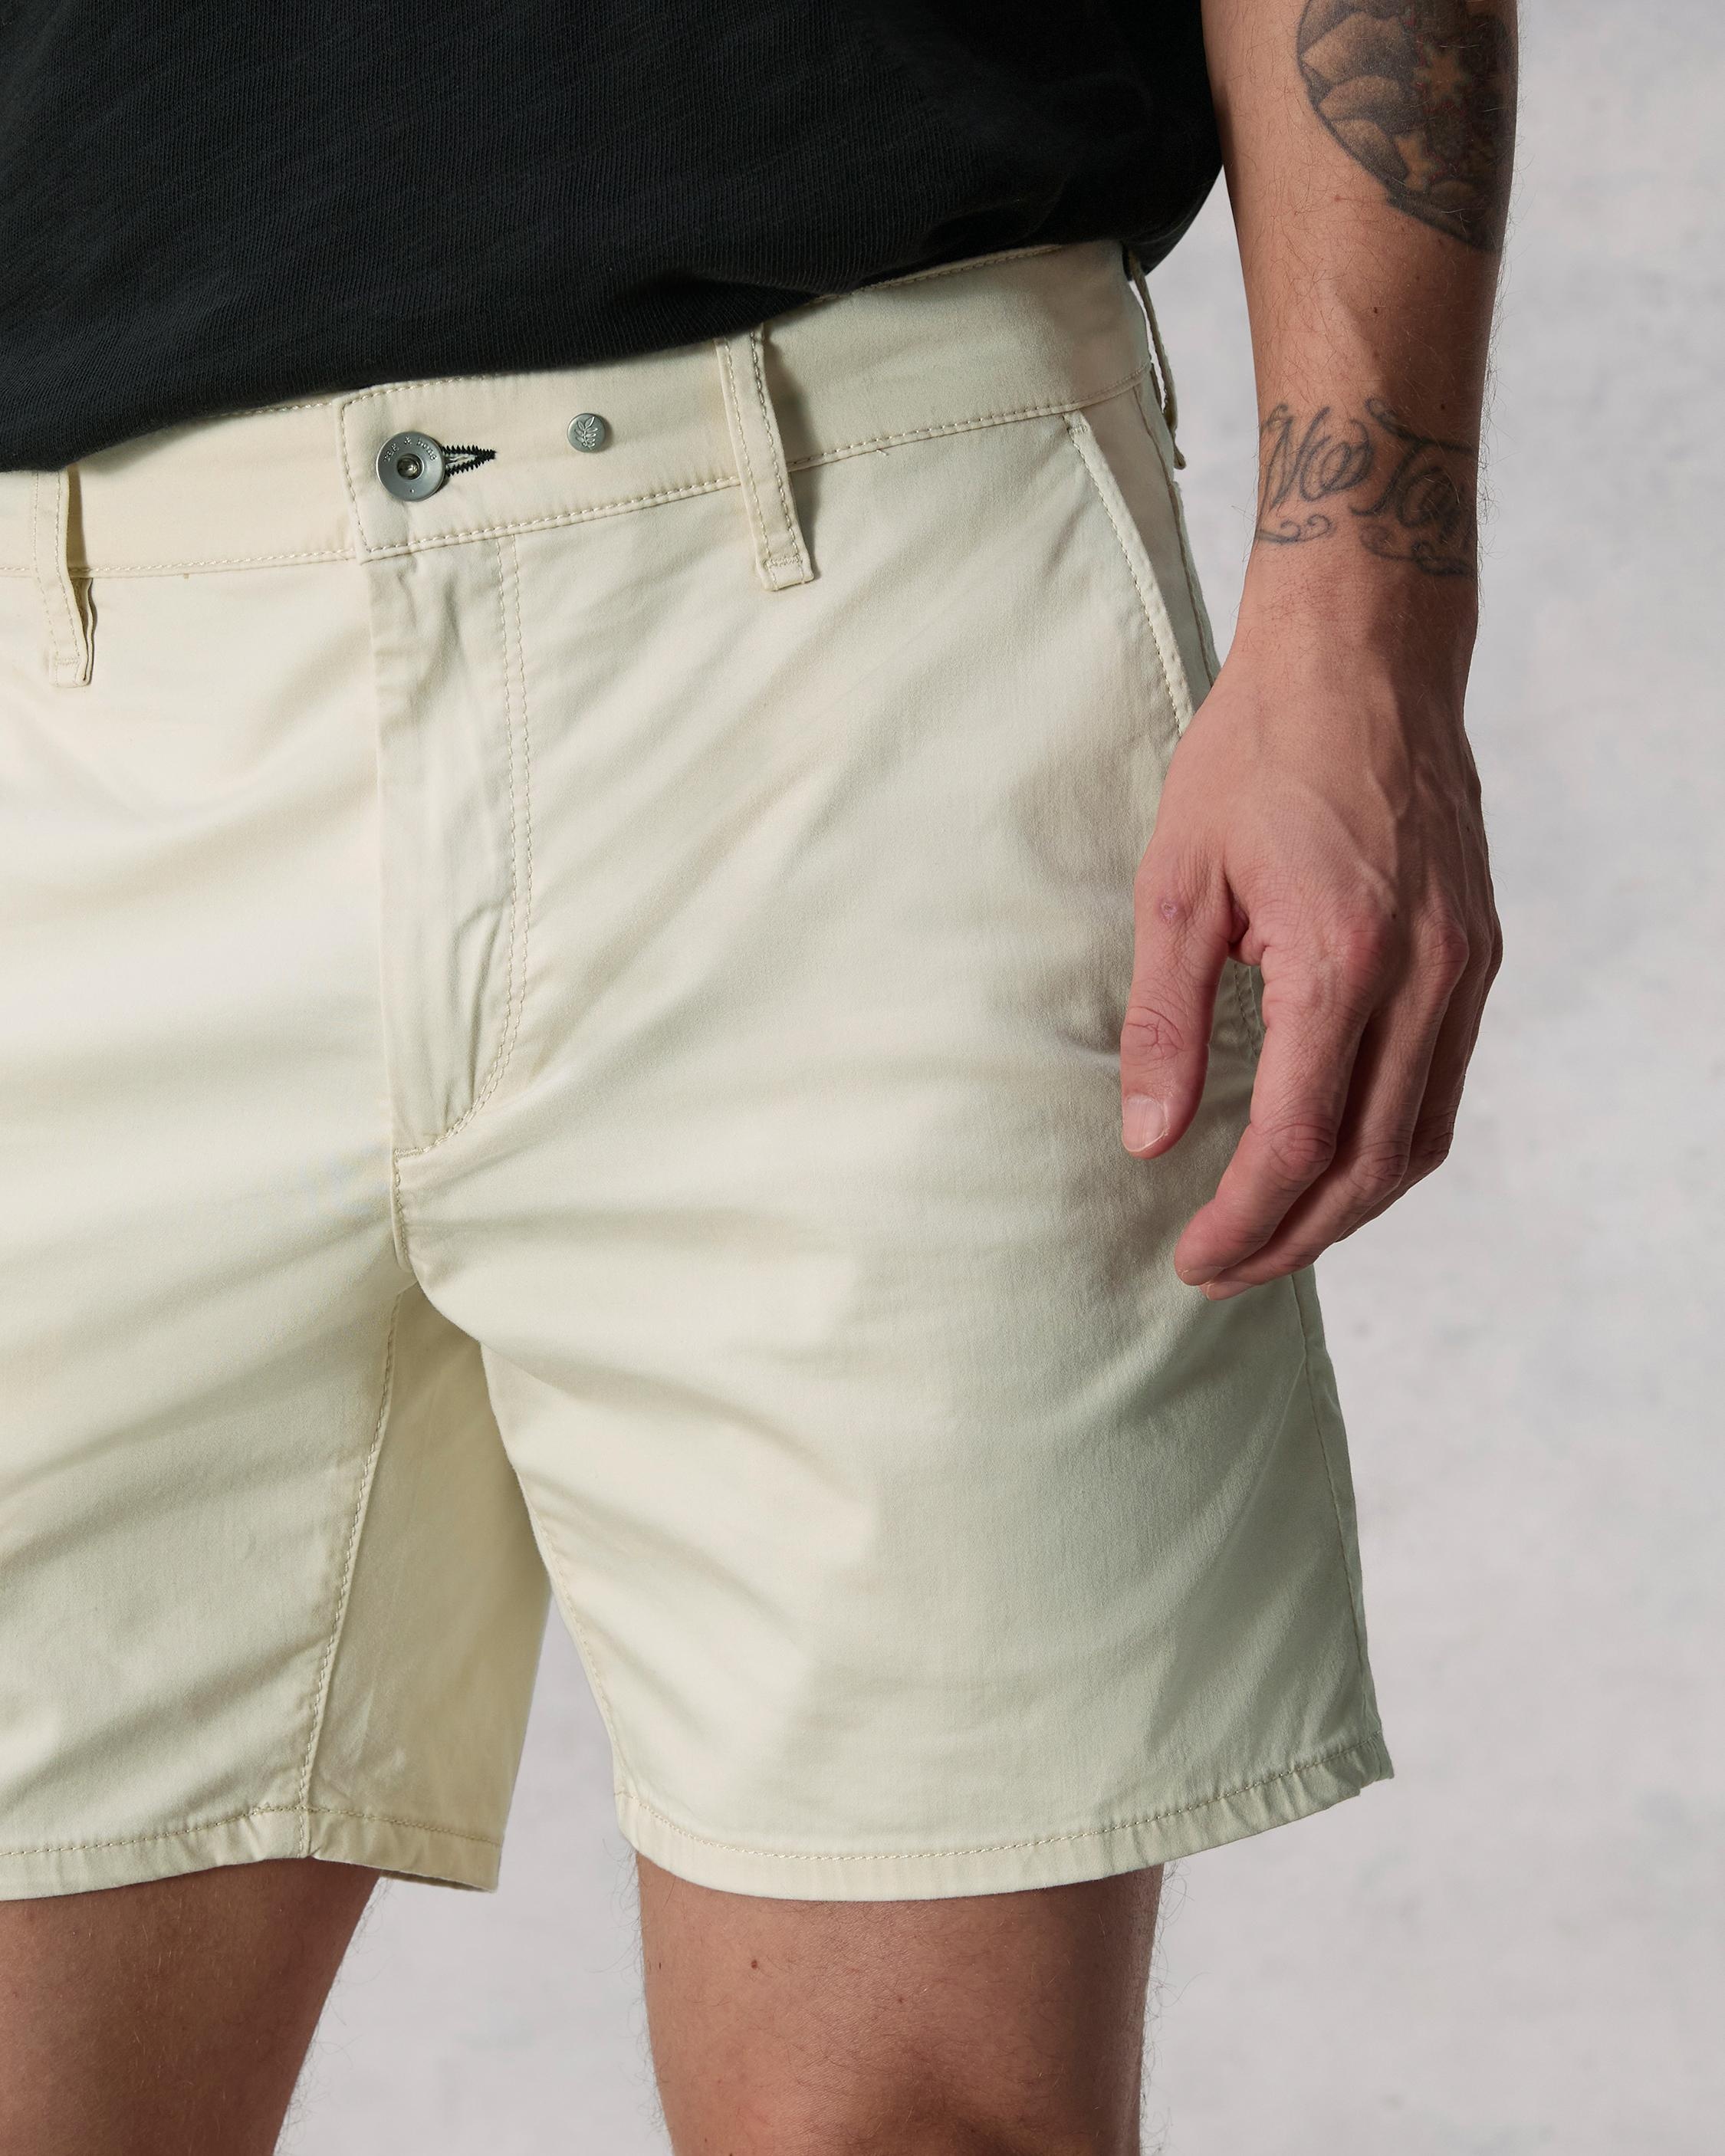 Standard Cotton Chino Short
Classic Fit - 6